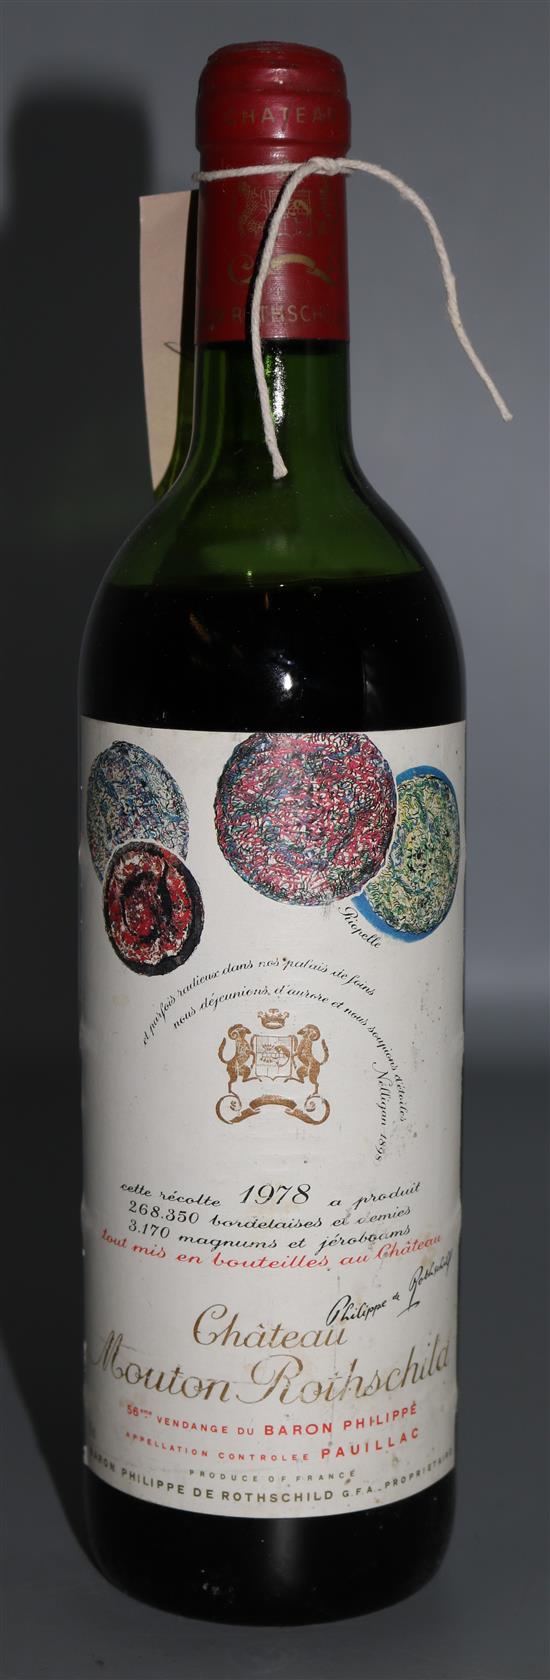 One bottle of Chateau Mouton Rothschild, 1978,